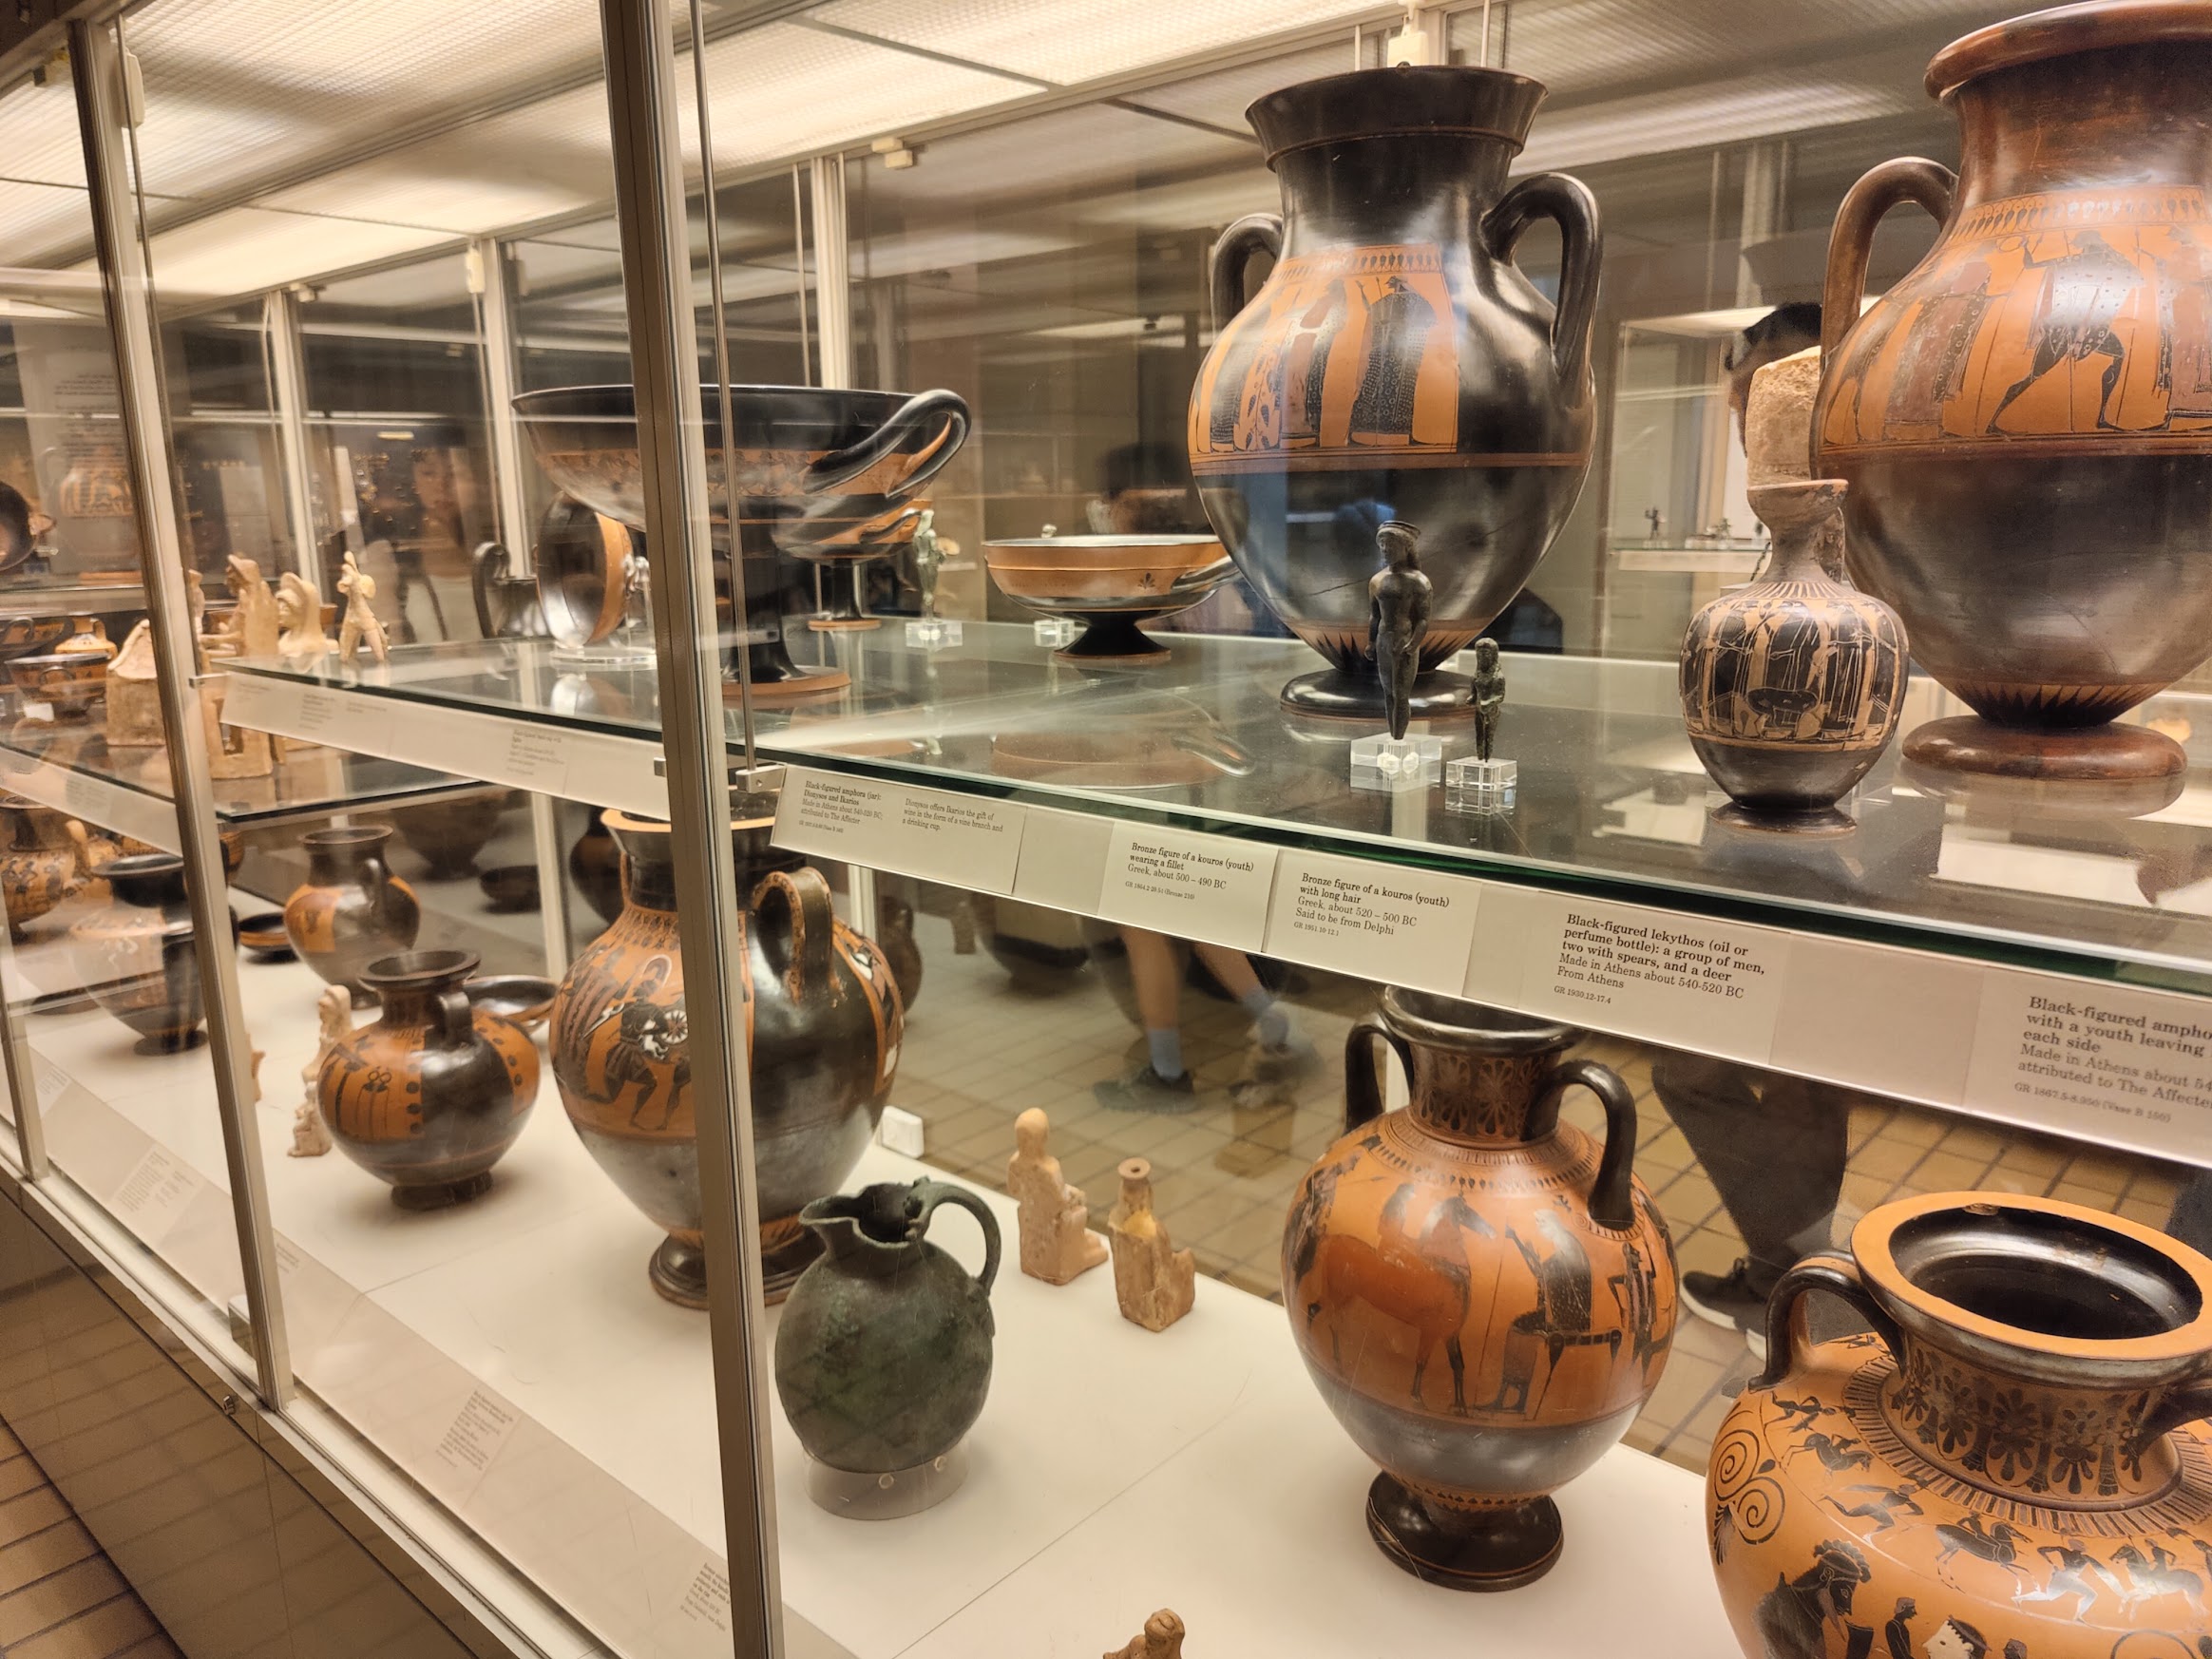 Clay pots from ancient Greece